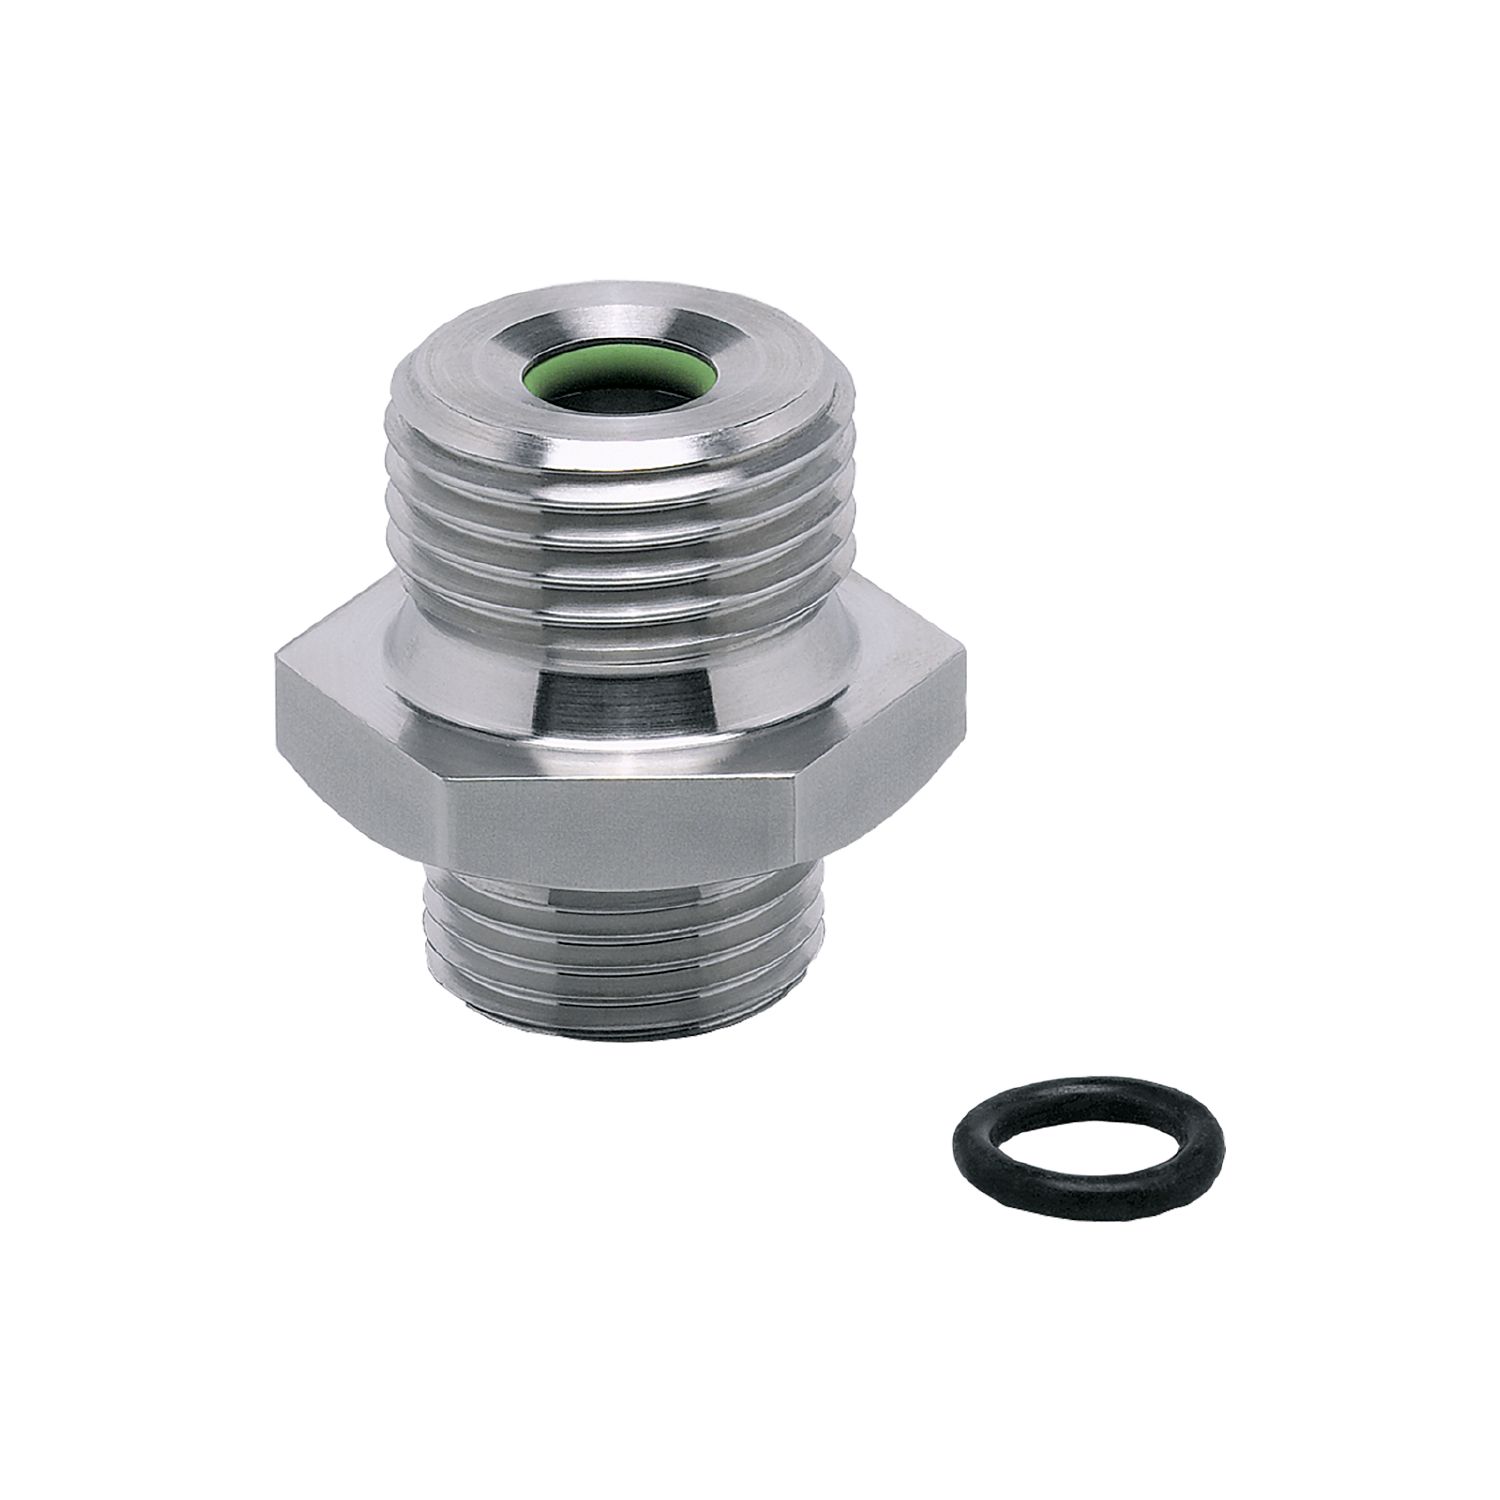 E30073 - Screw-in adapter for process sensors - ifm